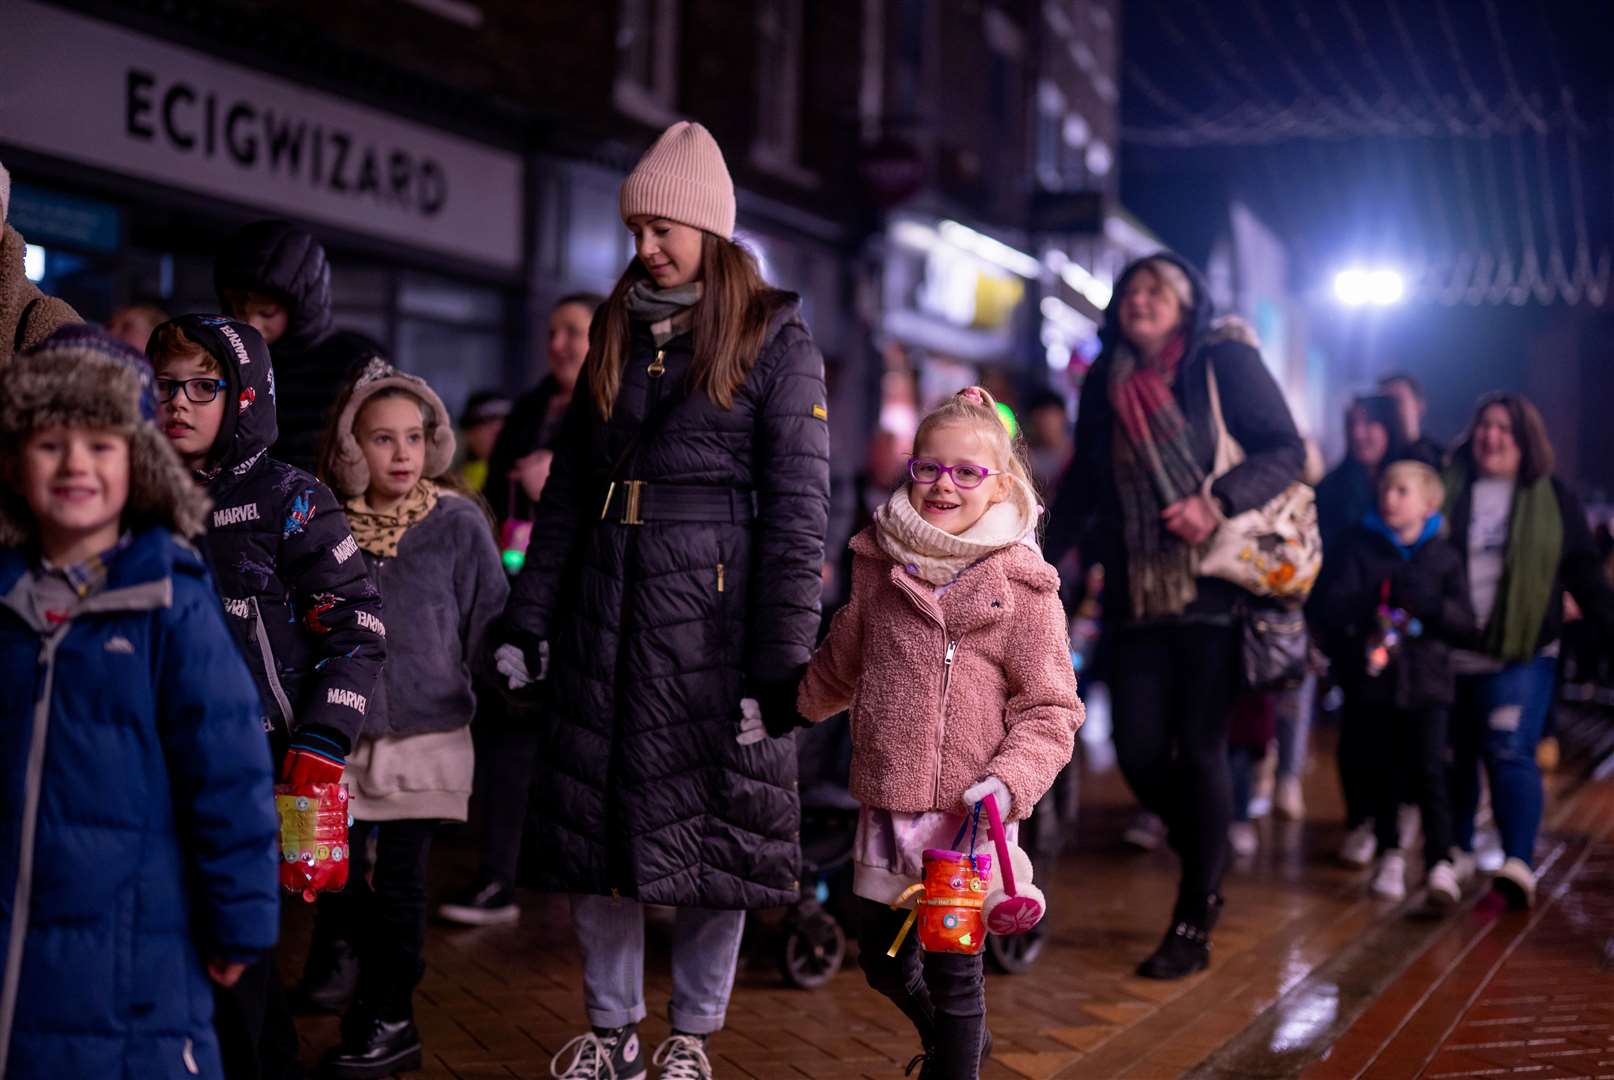 King's Lynn Christmas light switch-on. Pictures: Matthew Usher/West Norfolk Council